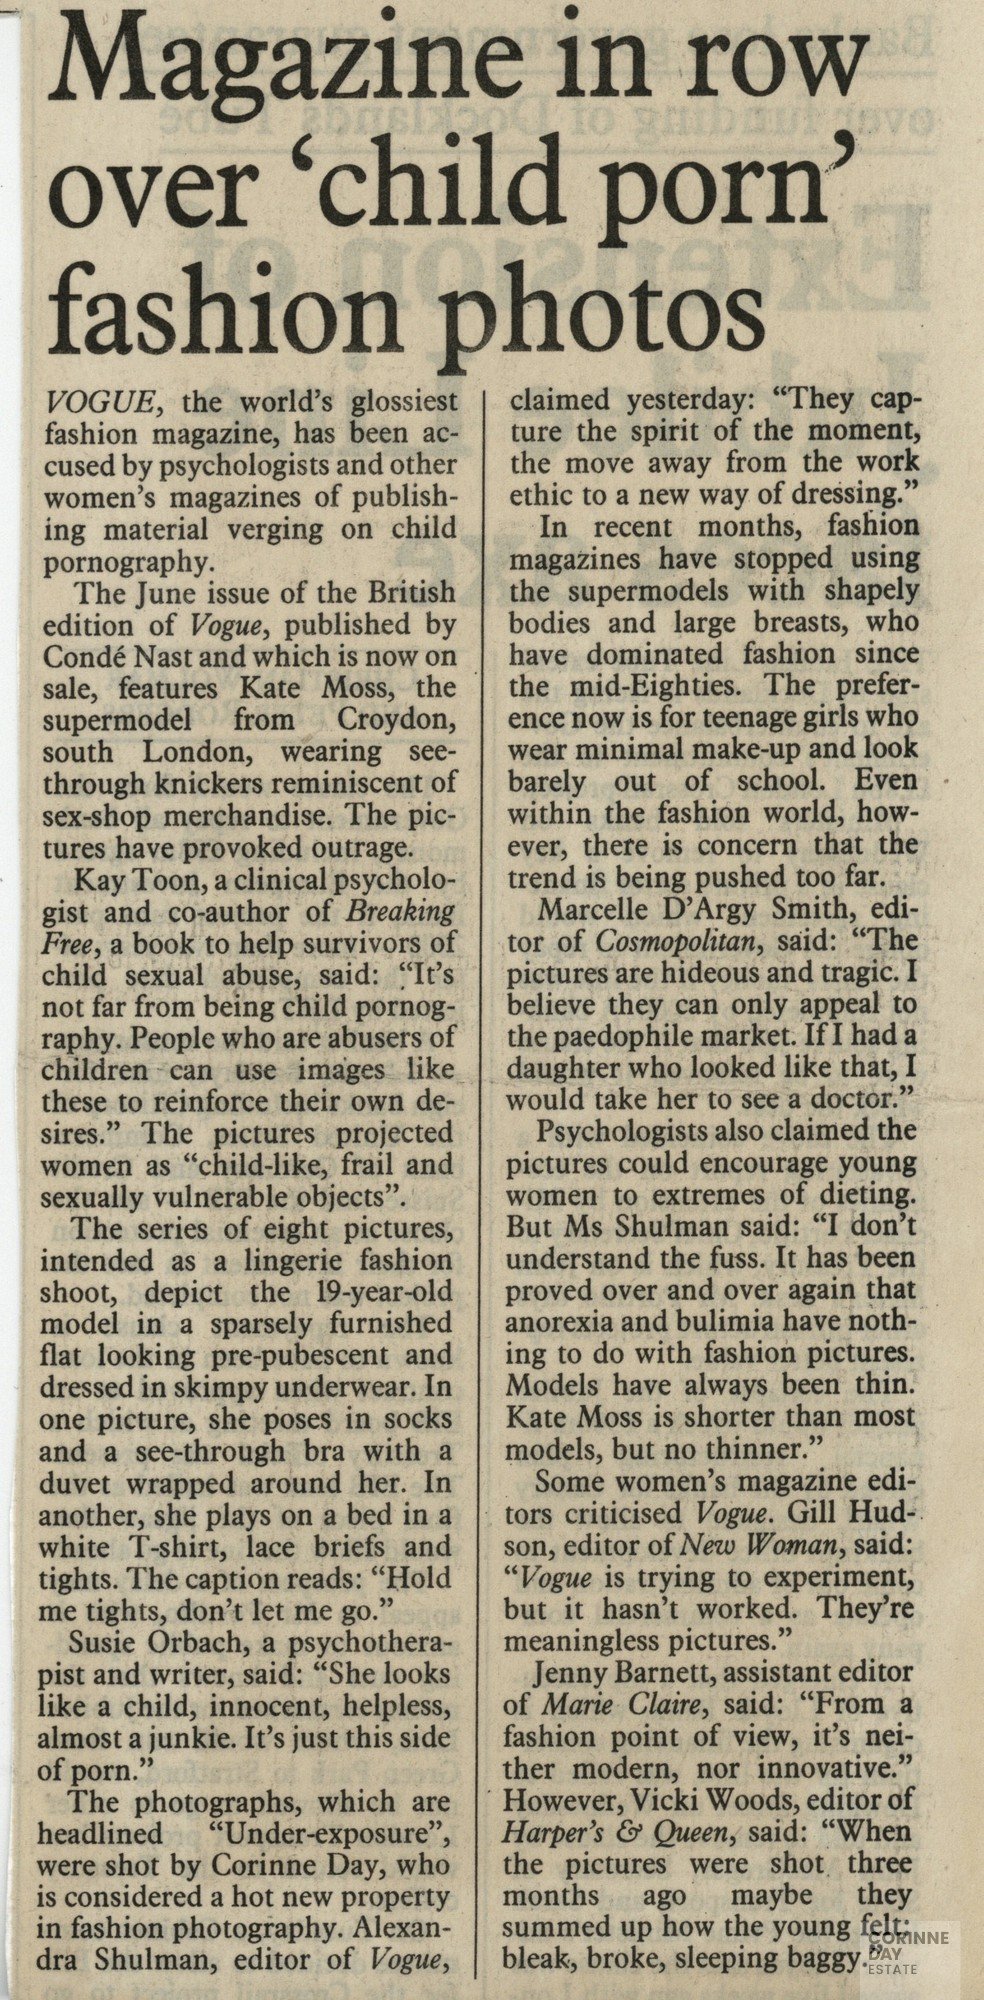 Magazine in row over 'child porn' fashion photos, The Independent, 22 May 1993 — Image 1 of 1